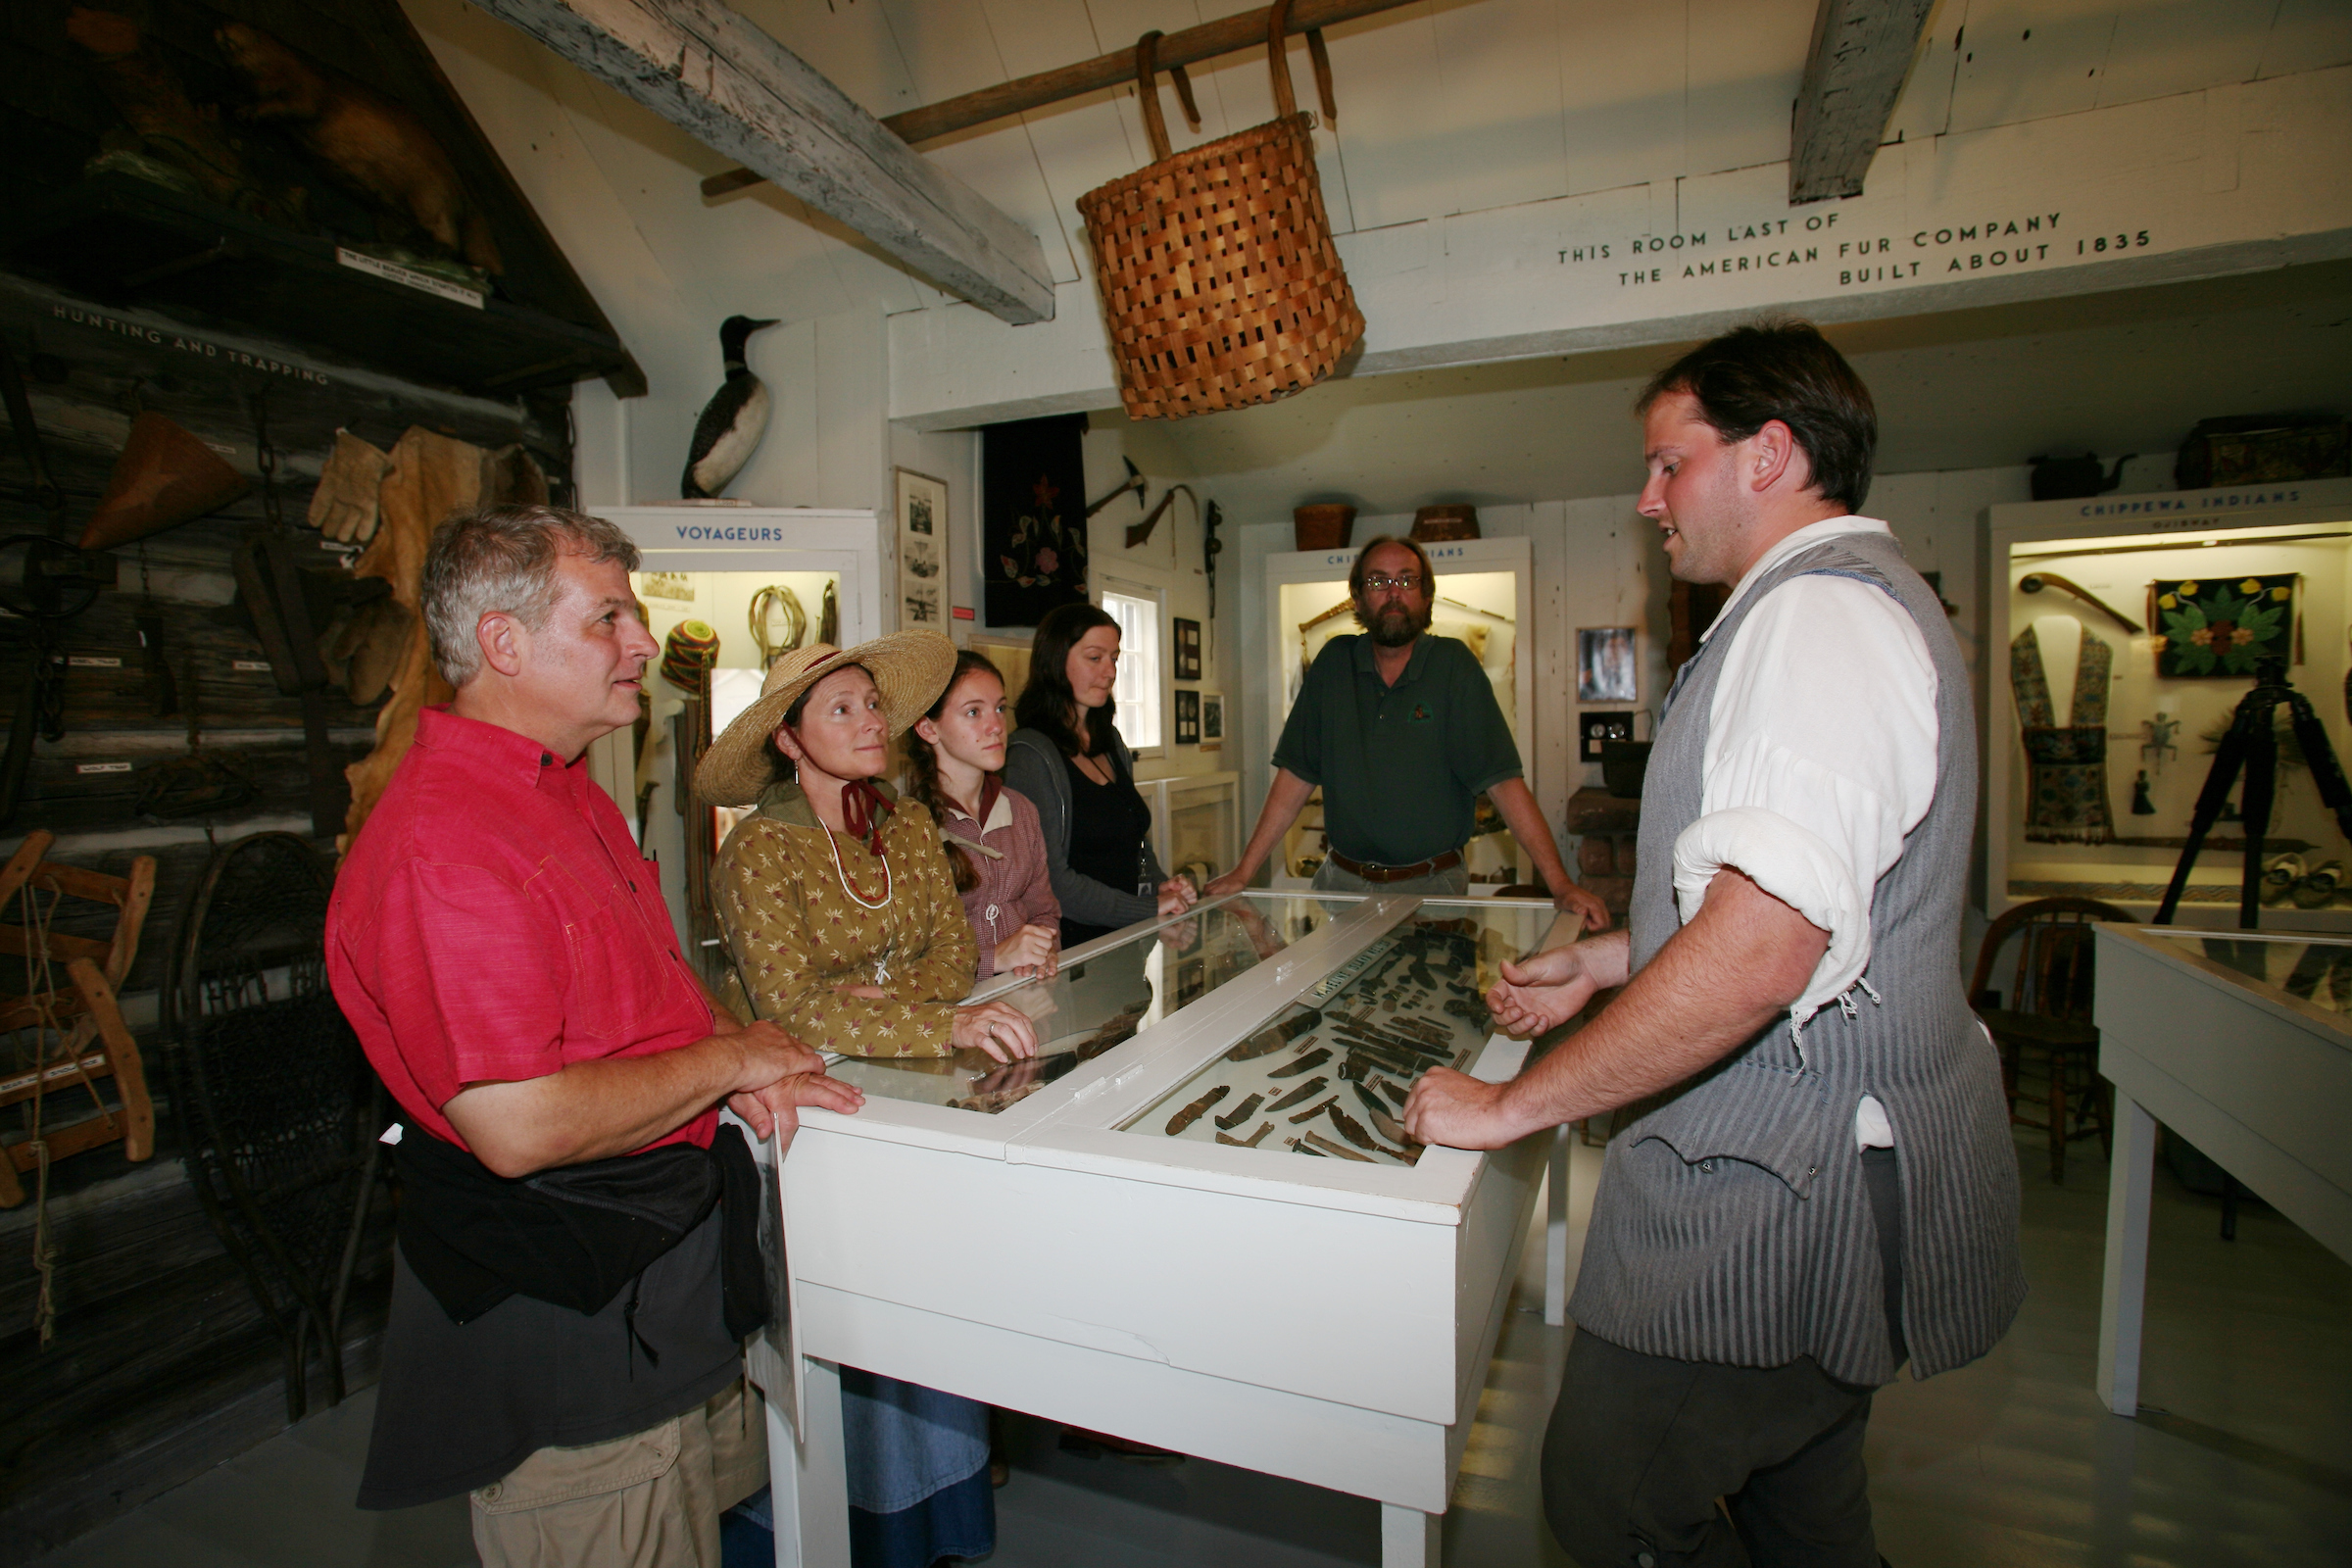 A group of white people stand around a display case with a museum volunteer describing the contents.